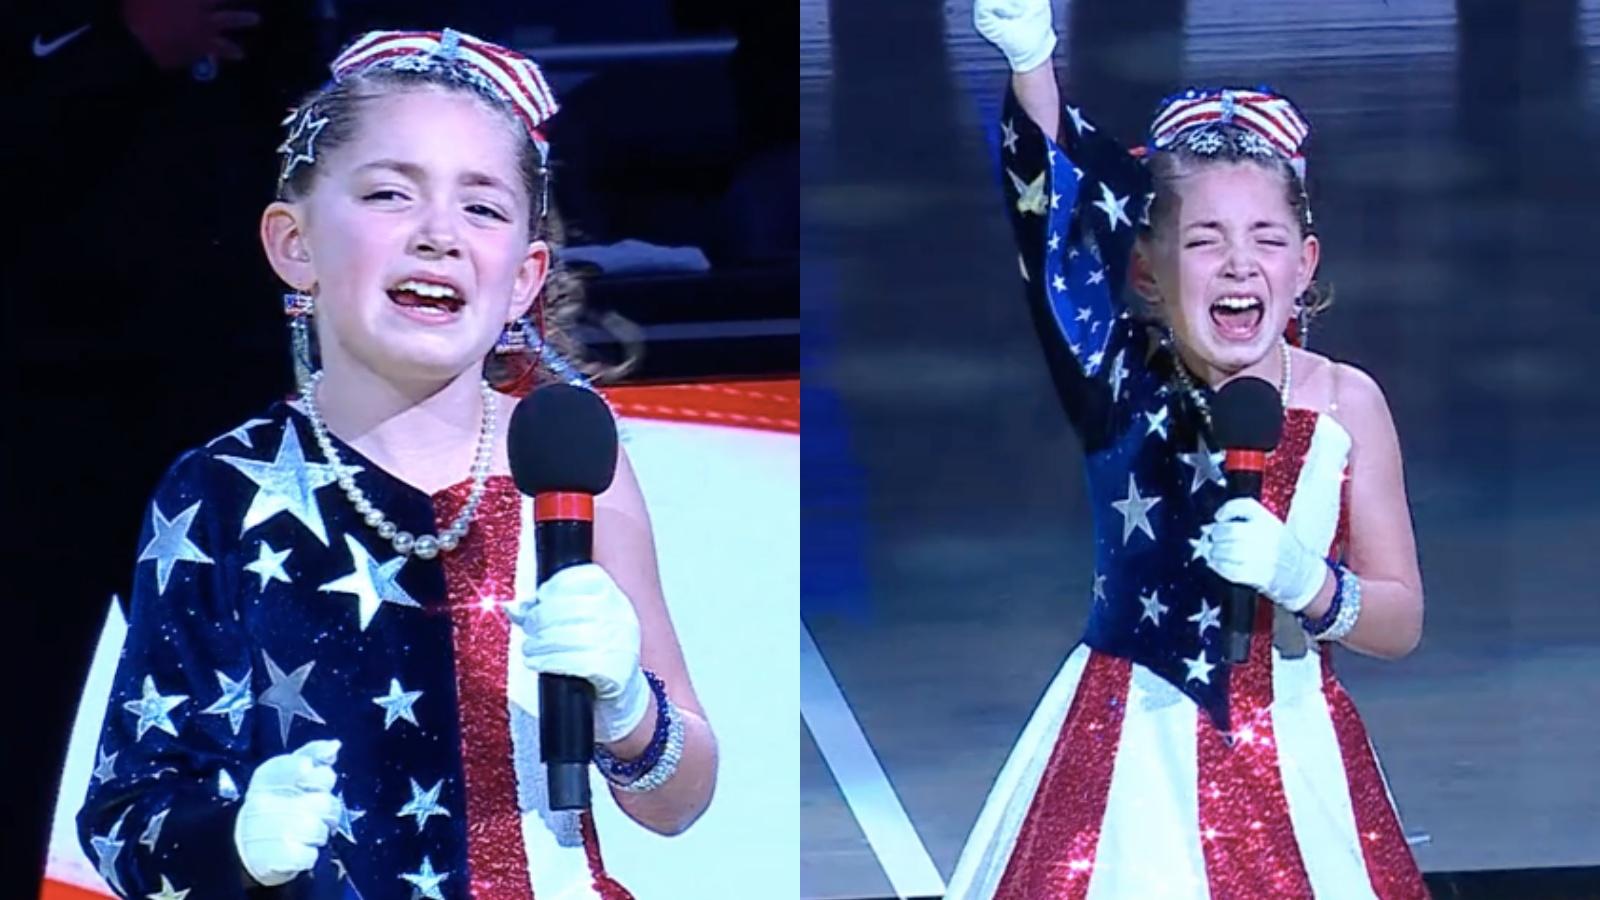 Kinsley Murray performs national anthem at Pacers game